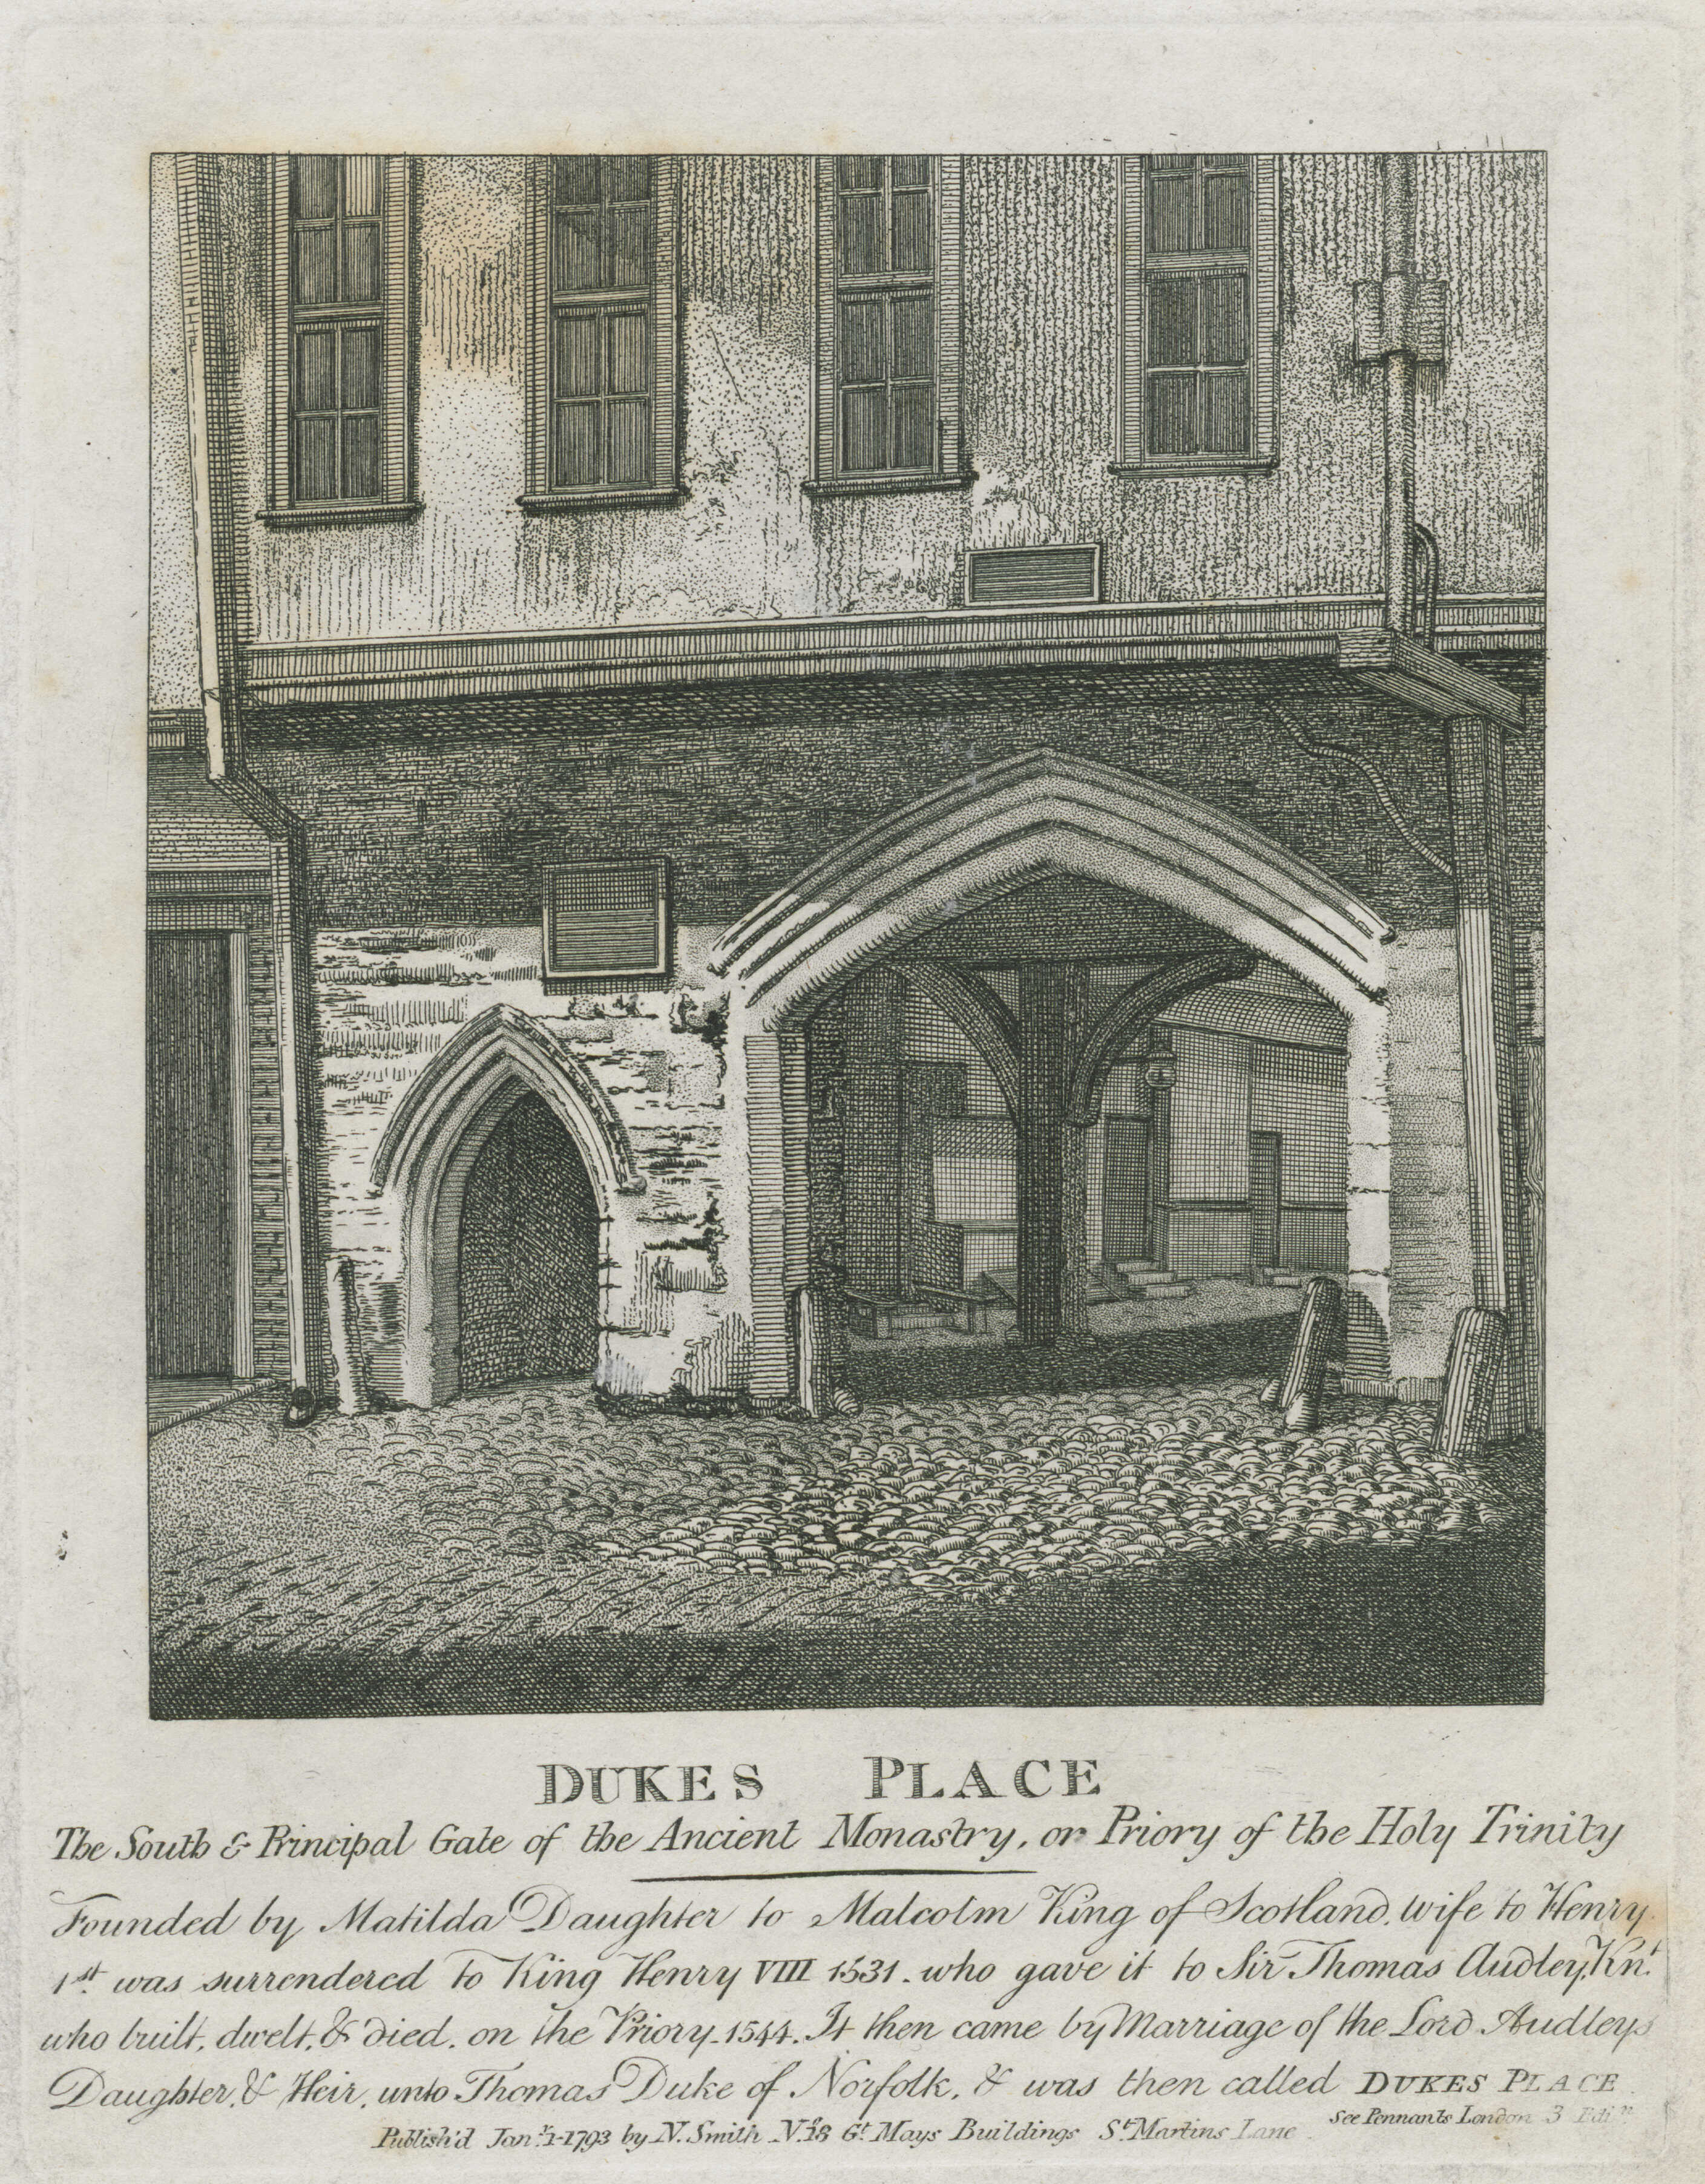 35-dukes-place-the-south-principal-gate-of-the-ancient-monastry-or-priory-of-the-holy-trinity